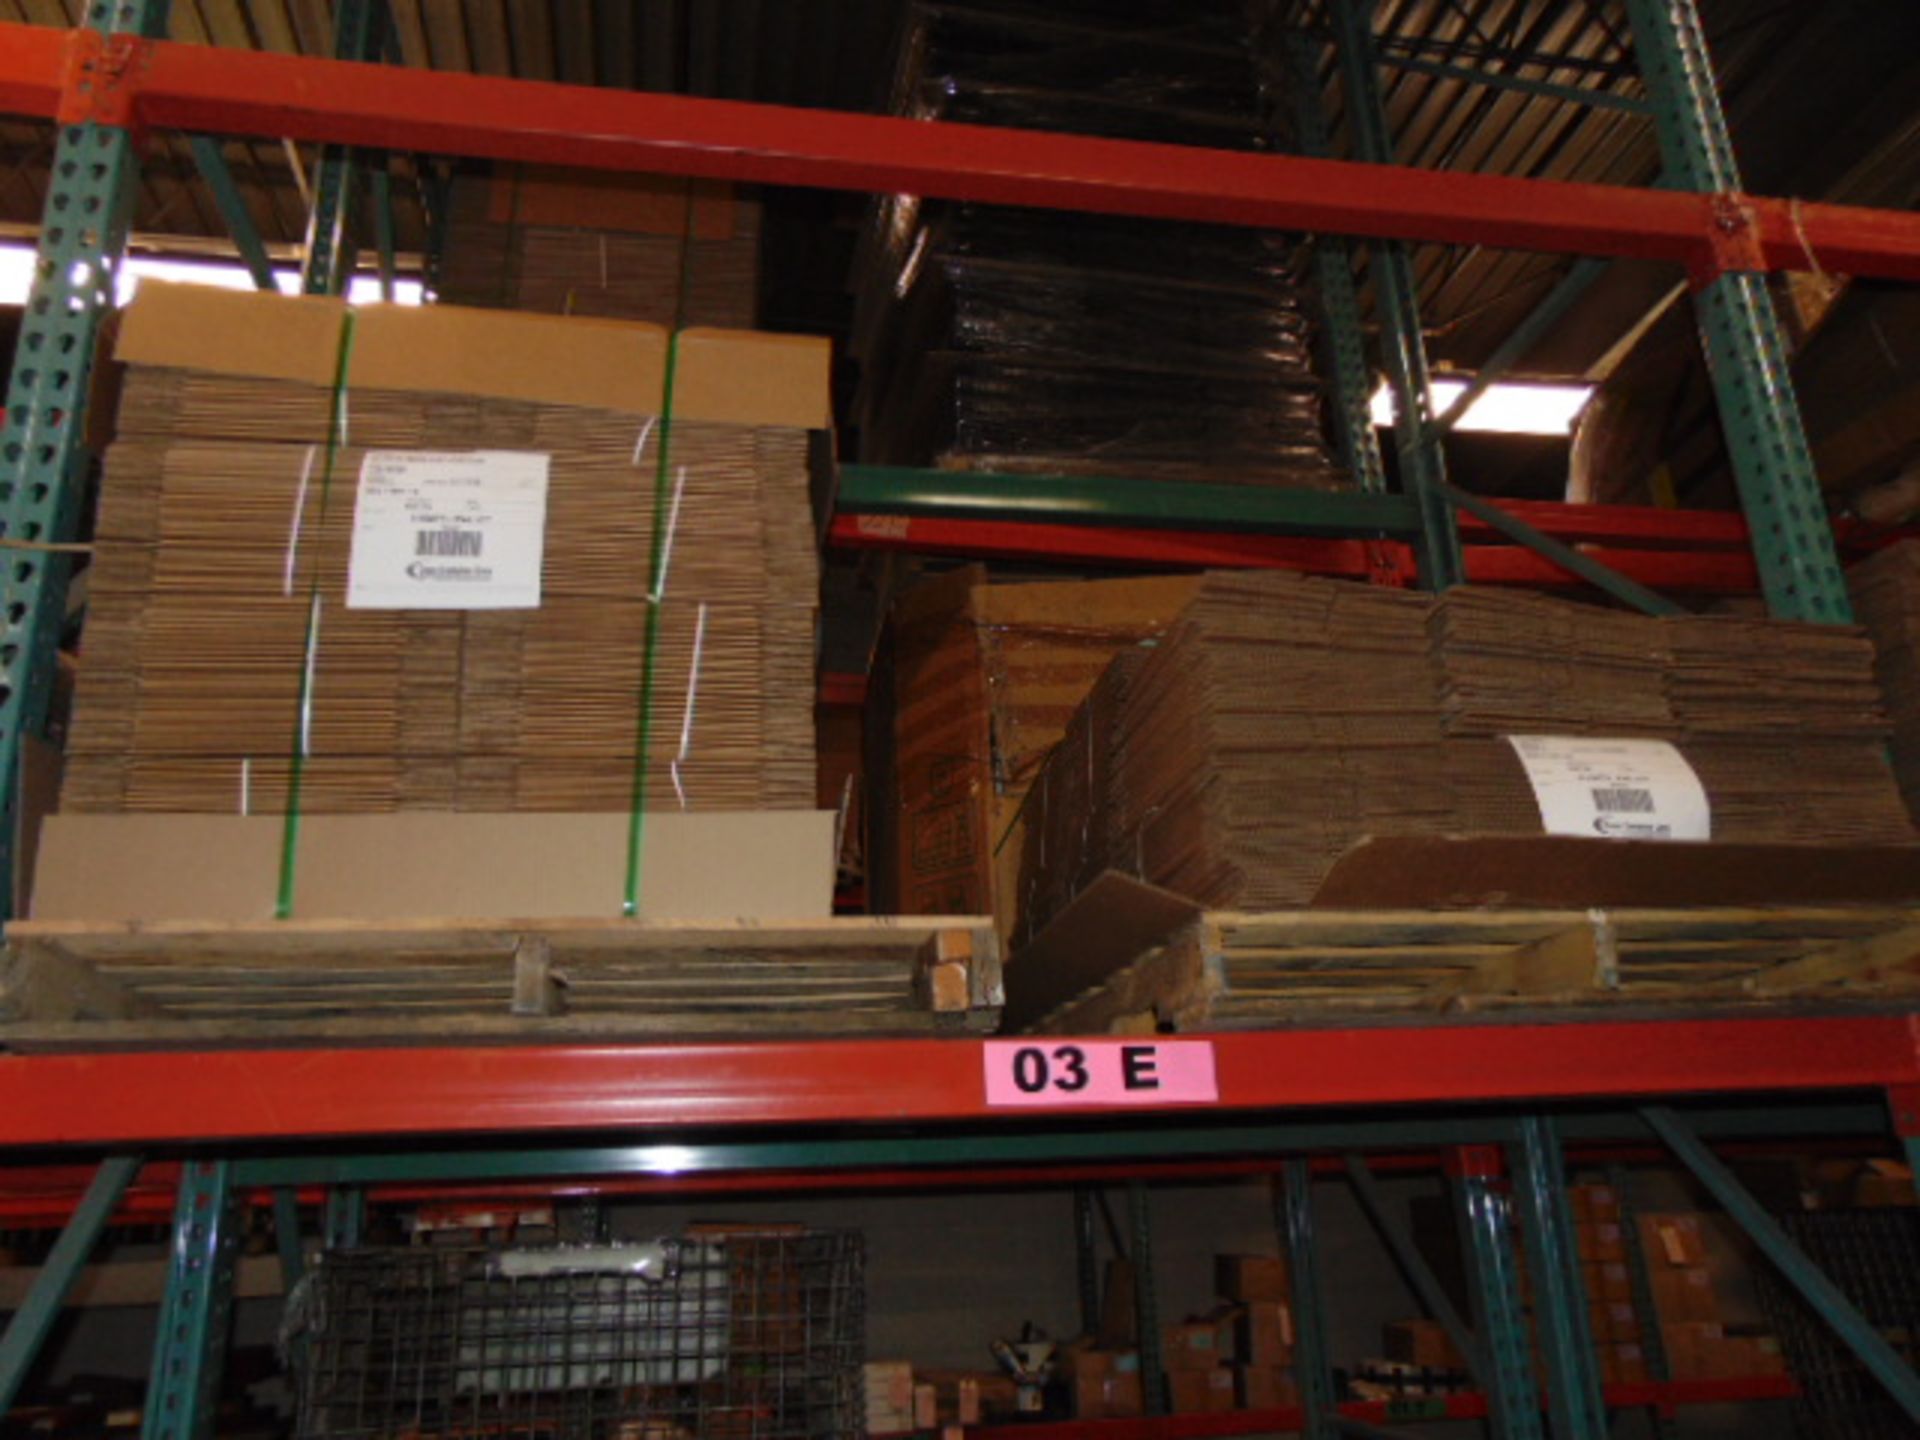 LOT CONSISTING OF: assorted steel in process parts, wire baskets & cardboard (no dies or racks) ( - Image 12 of 39